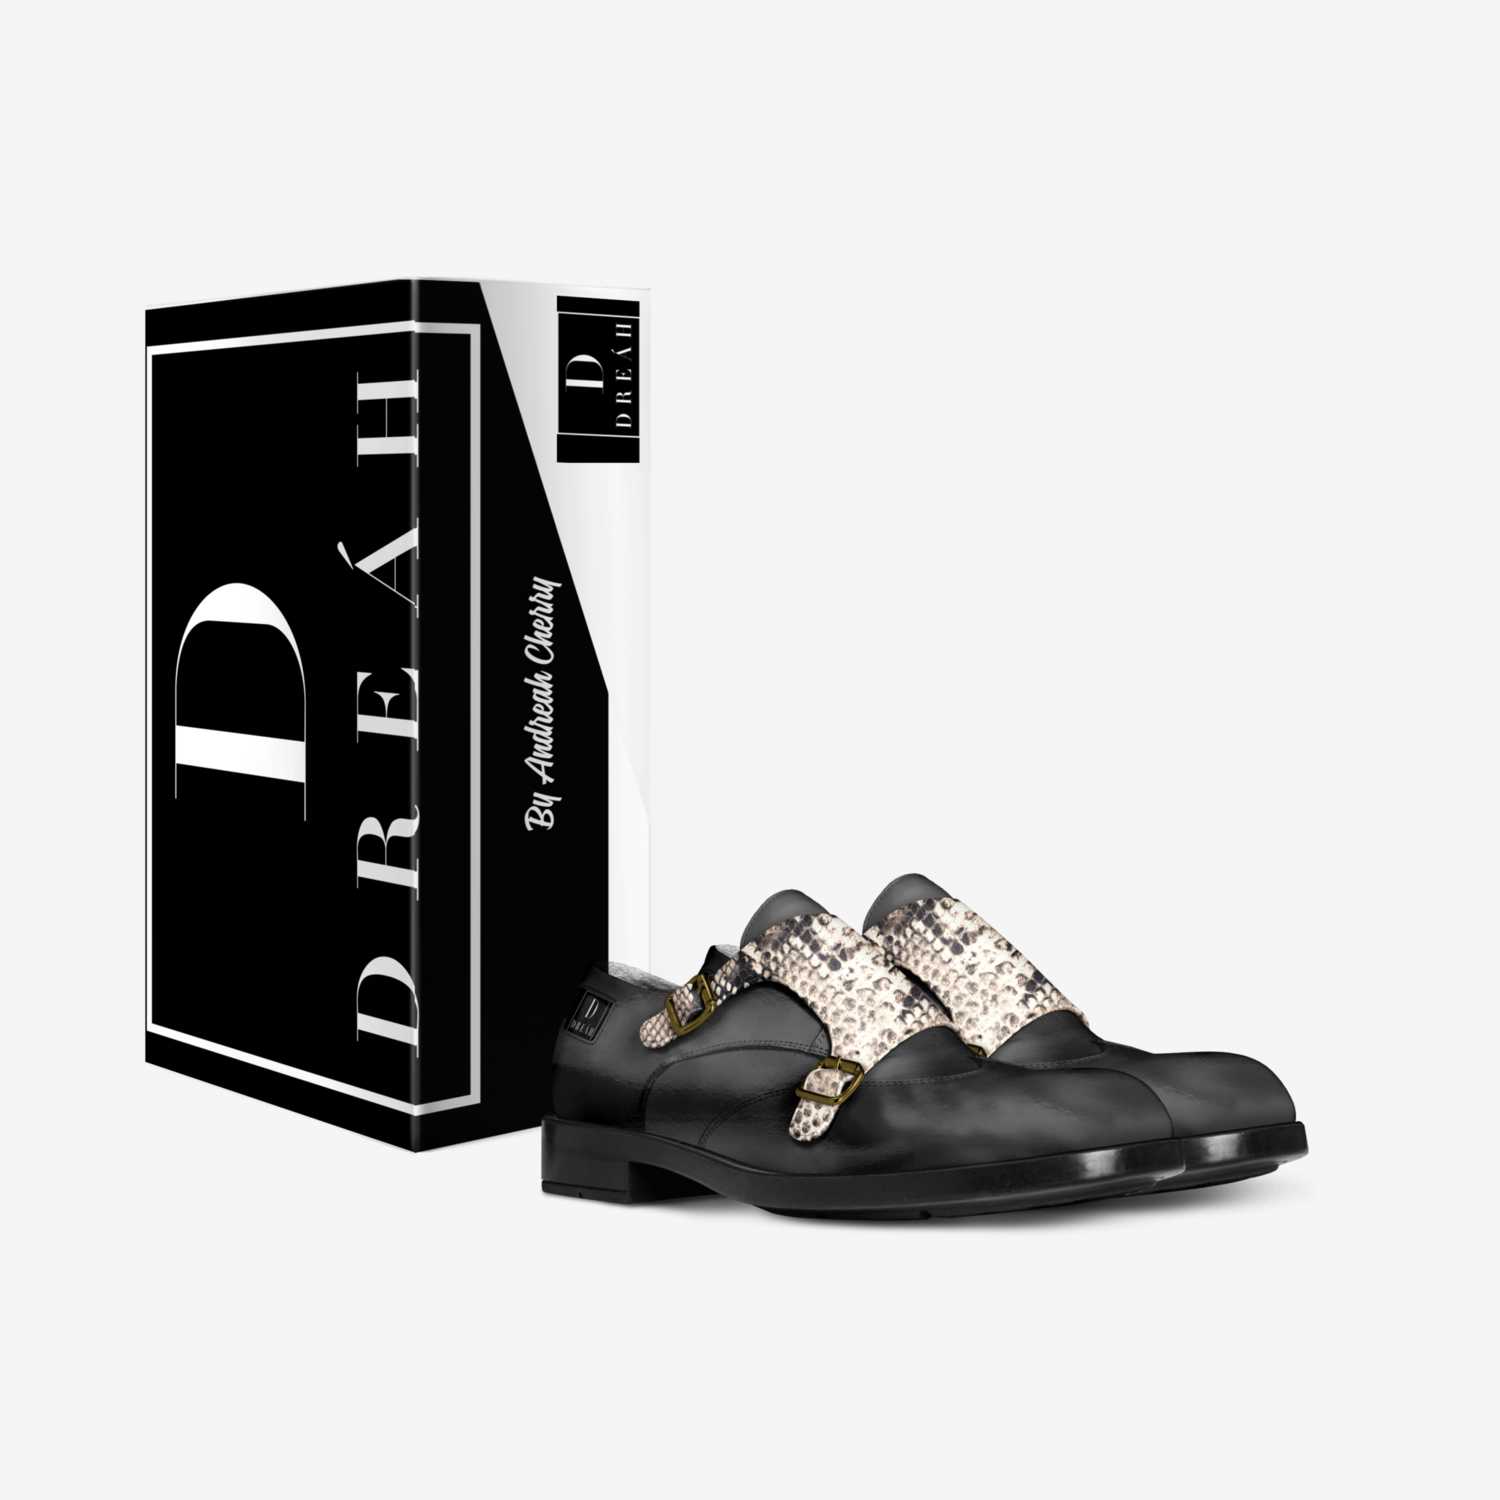 Dreáh Italy custom made in Italy shoes by Andreah Cherry | Box view